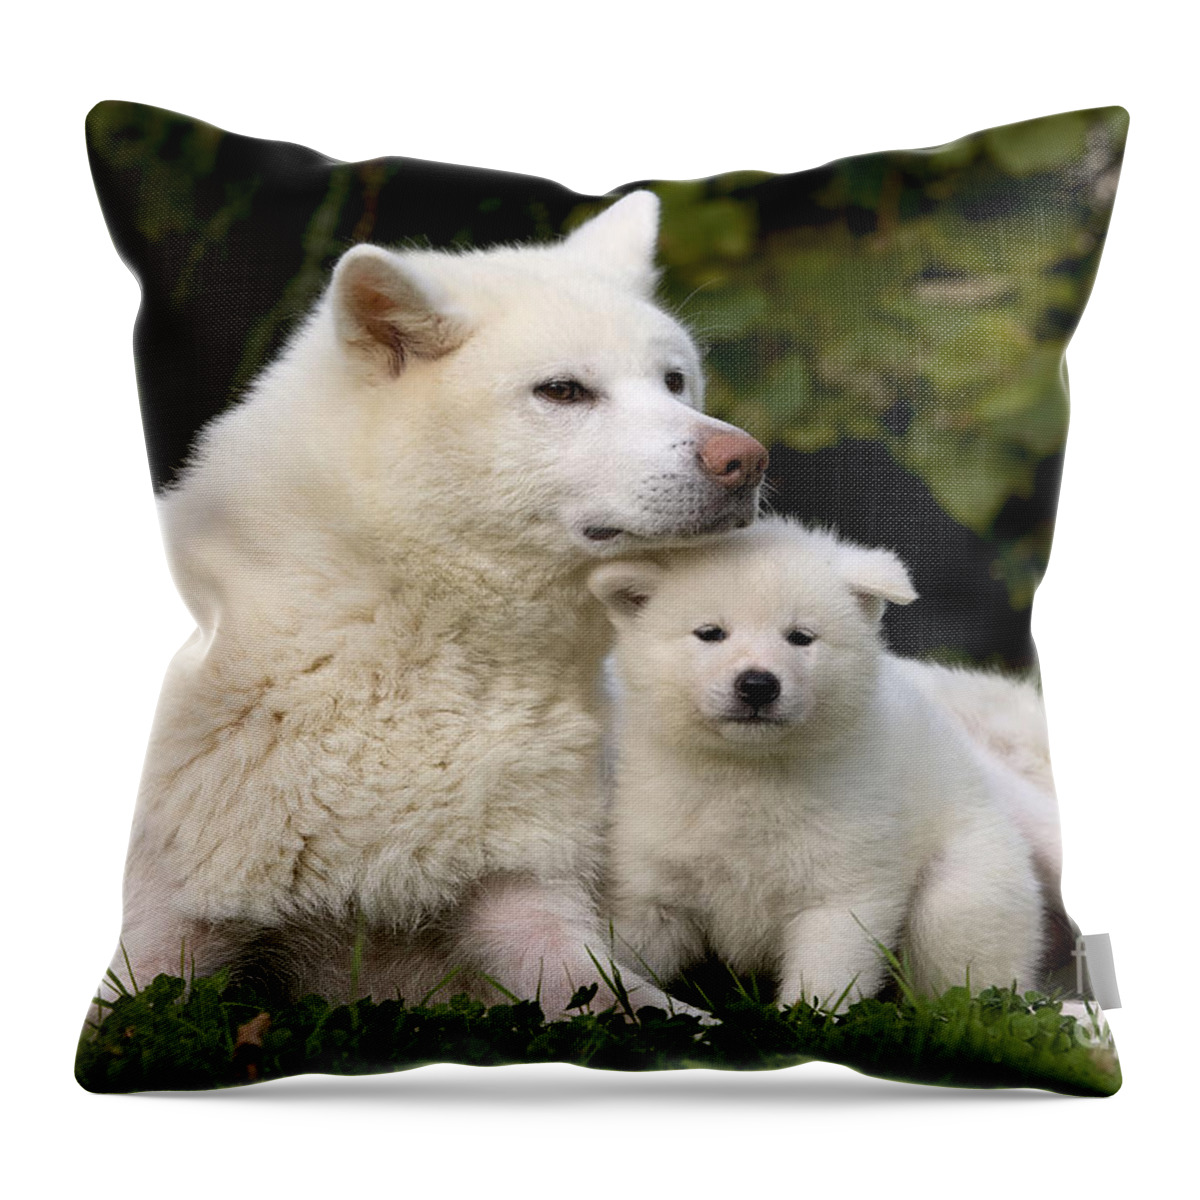 Dog Throw Pillow featuring the photograph Akita Inu Dog And Puppy by Jean-Michel Labat